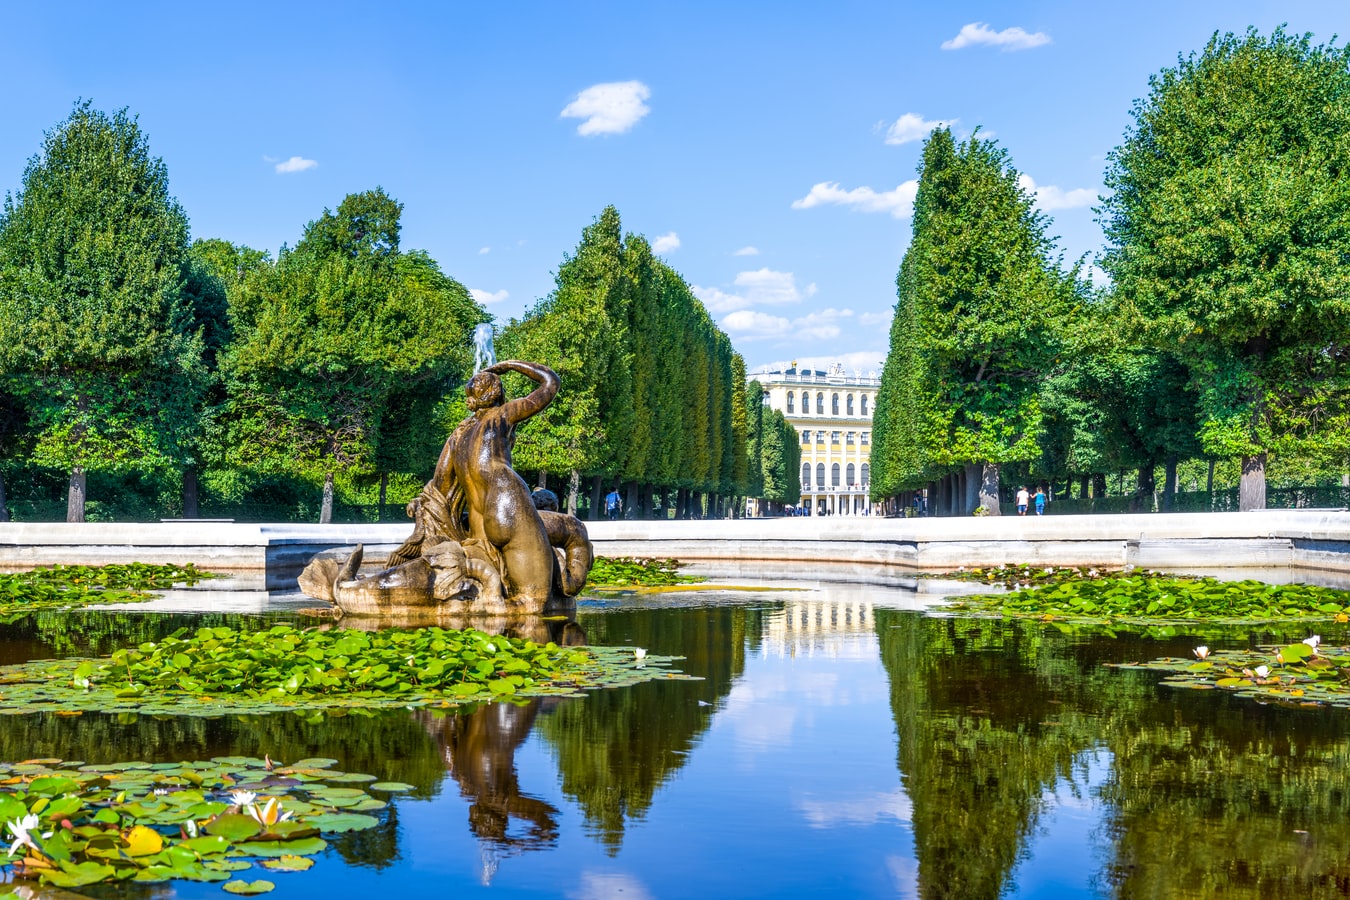 Fall In Love All Over Again With These 10 Romantic Things To Do In Vienna!